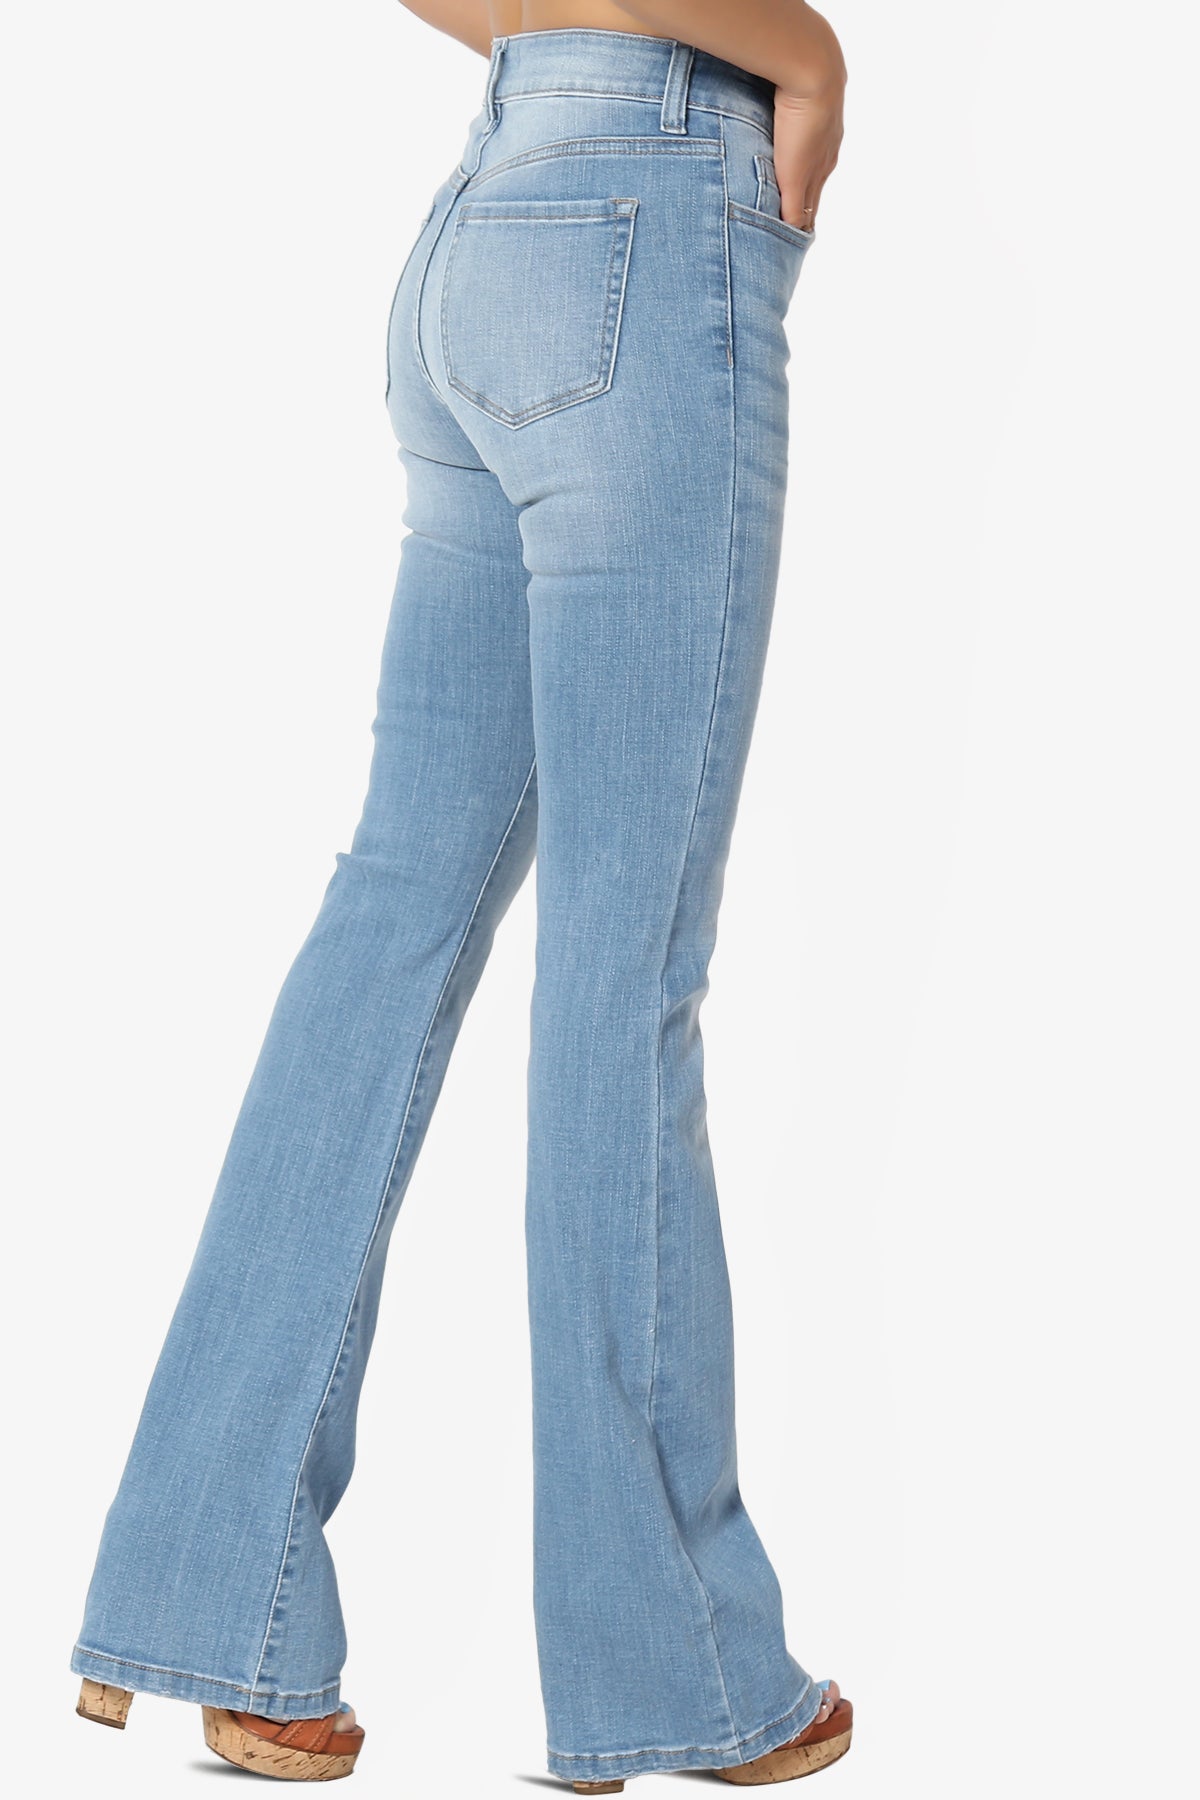 Clyde Washed Mid Rise Boot Cut Jeans in Light